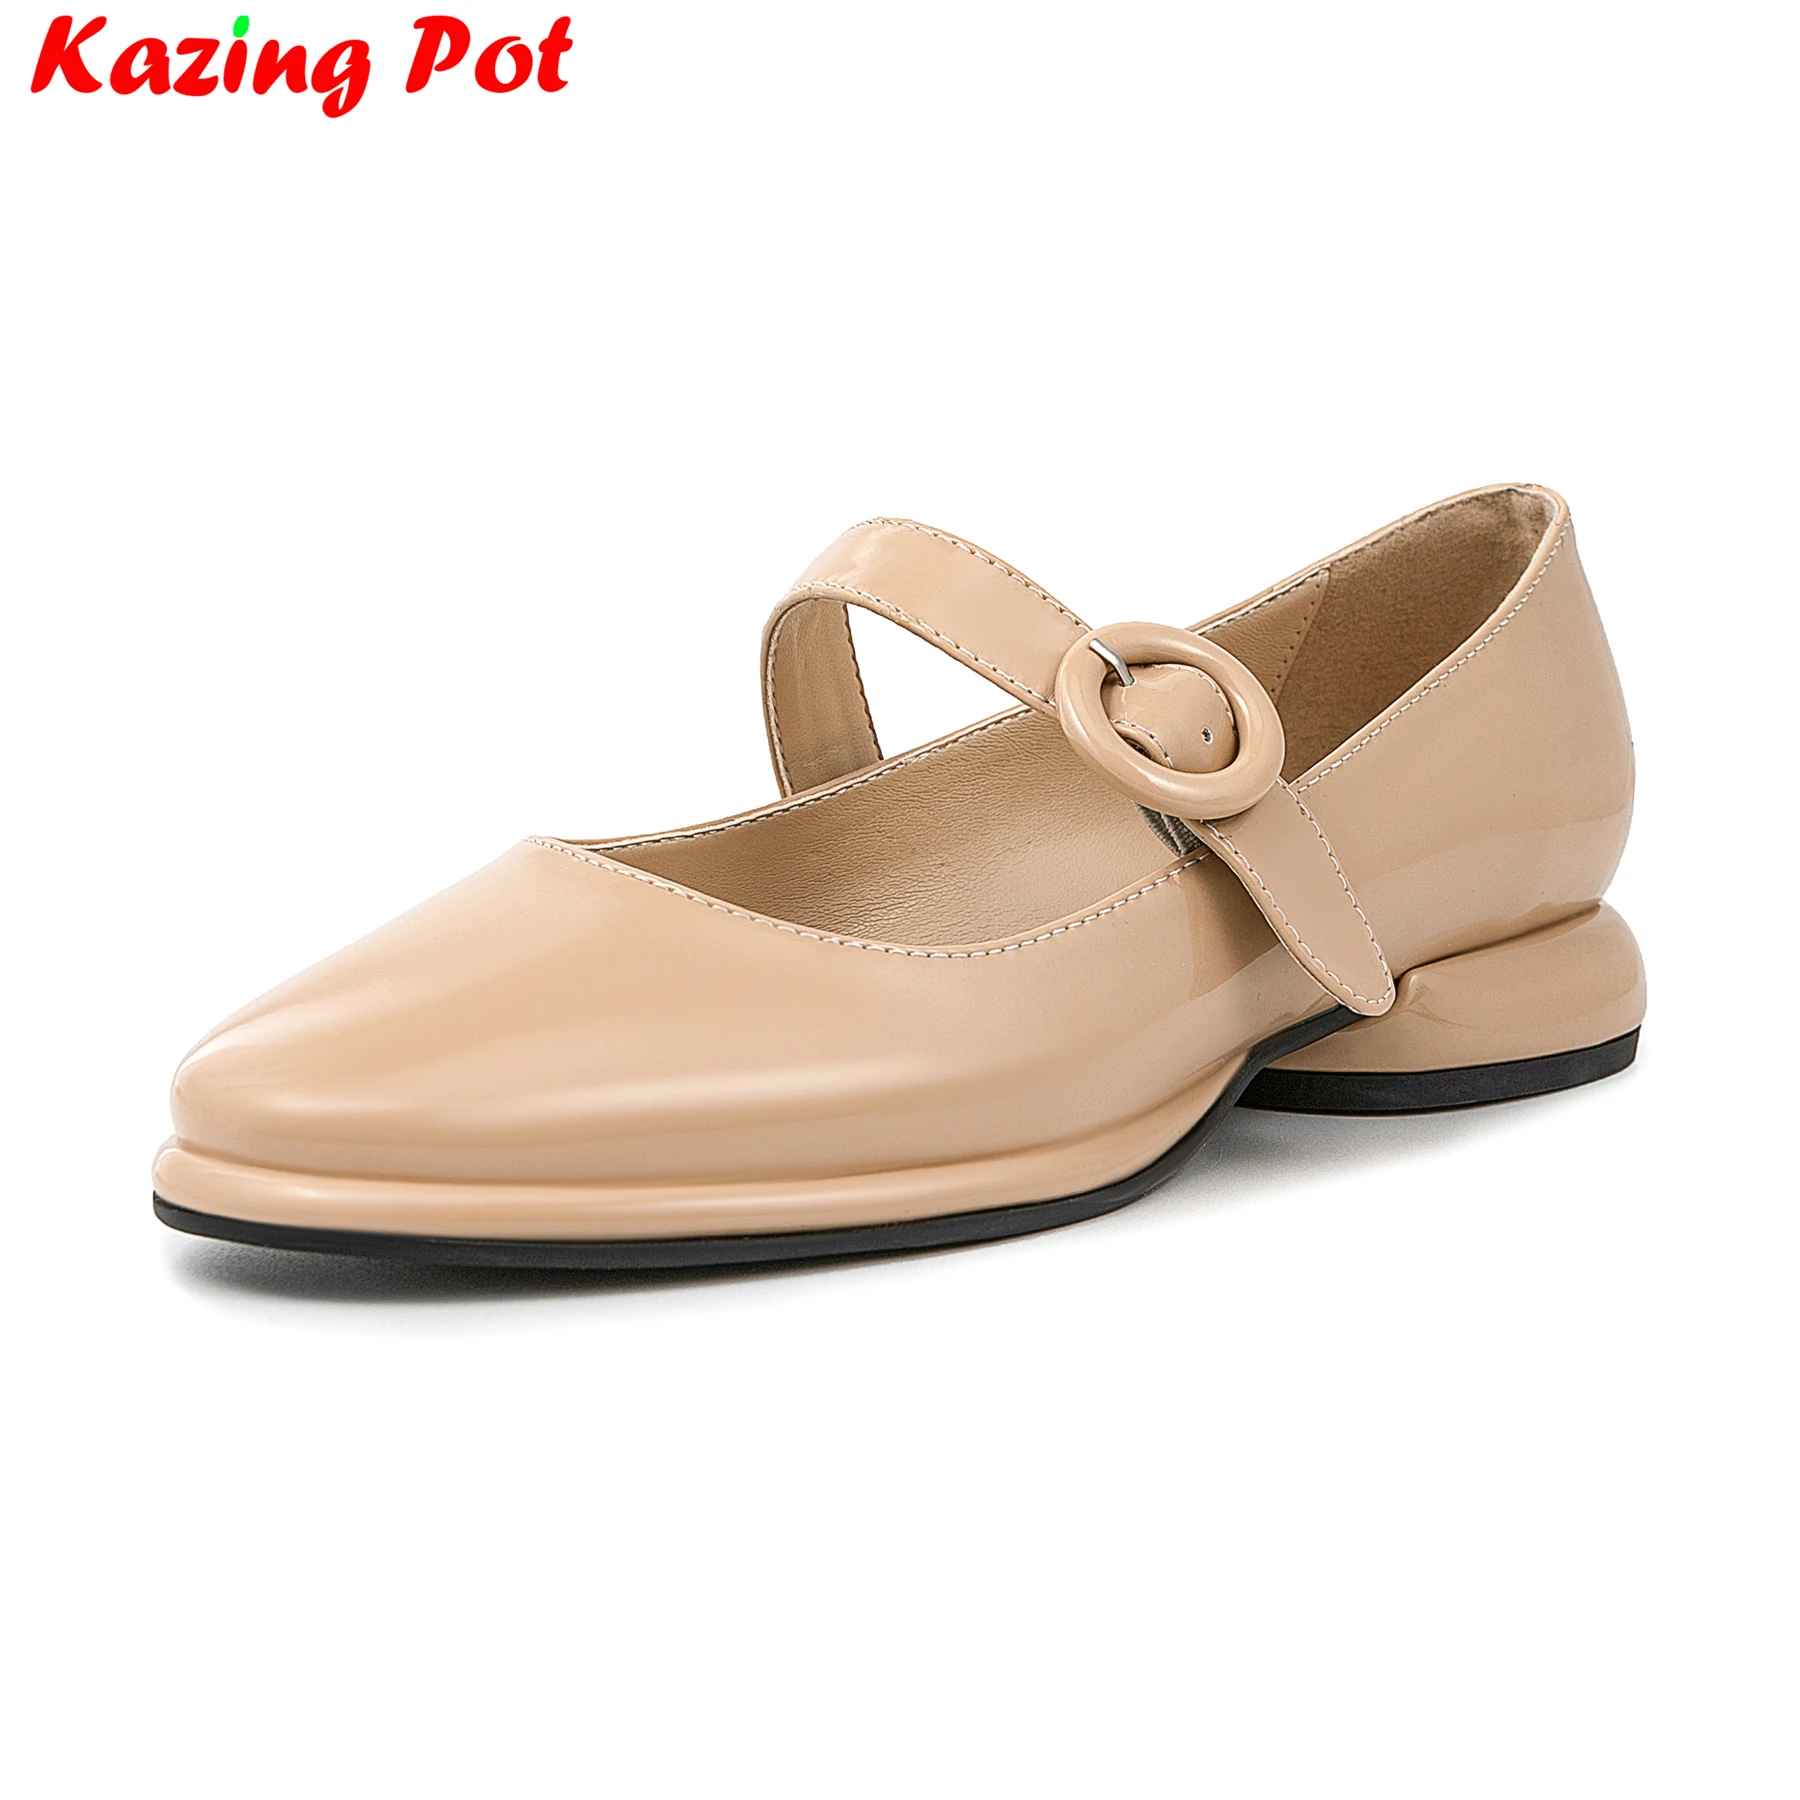 

Krazing Pot Big Size Patent Leather Round Toe Summer Buckle Strap Mary Janes Dating Low Heels Dance Shallow Colorful Women Pumps